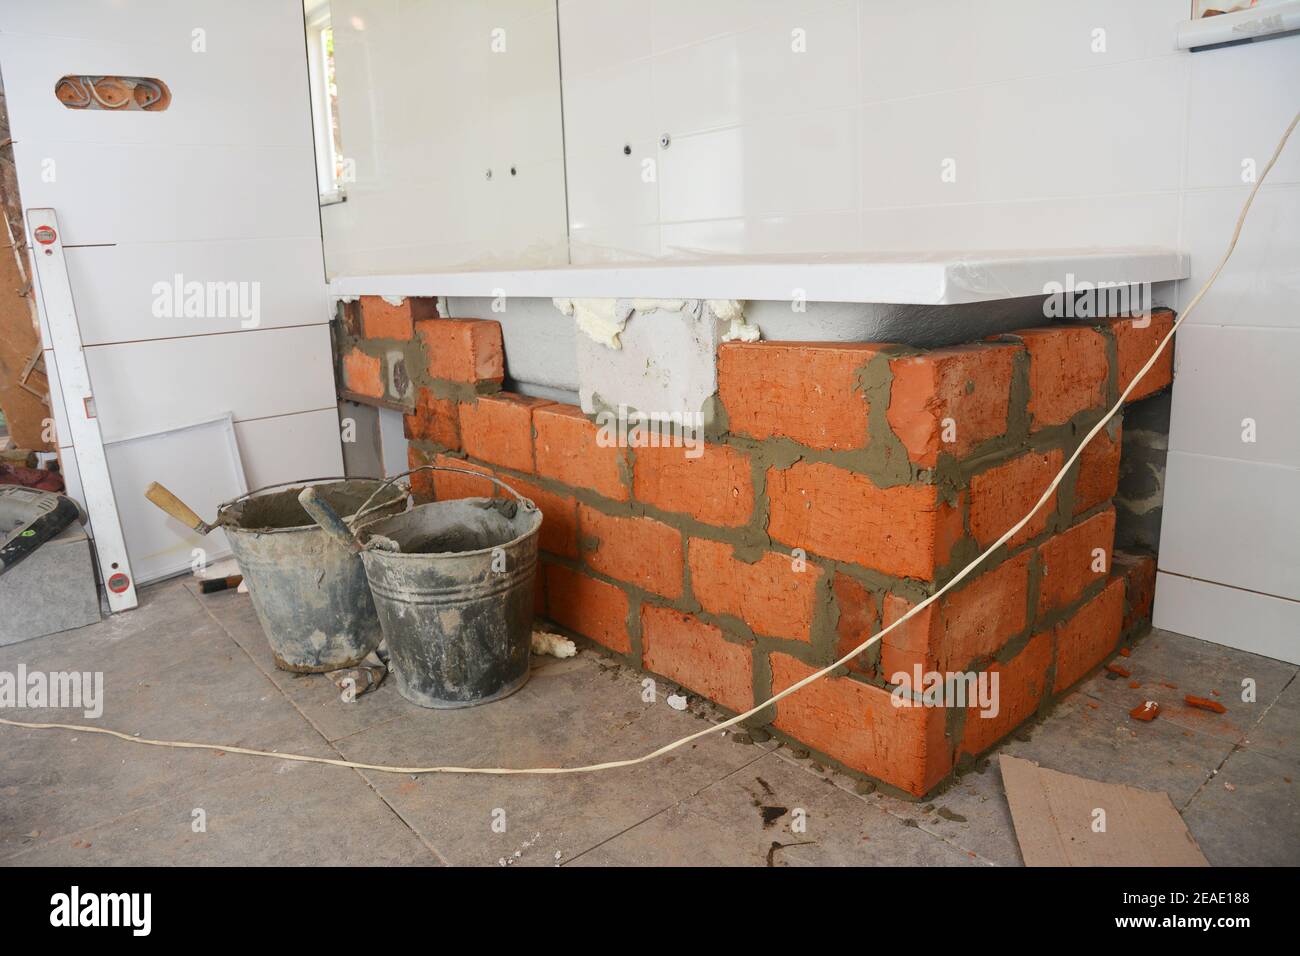 New acrylic bathtub installation near the mirror and laying bricks around a tub to tile it later while bathroom remodel, bath renovation. Stock Photo